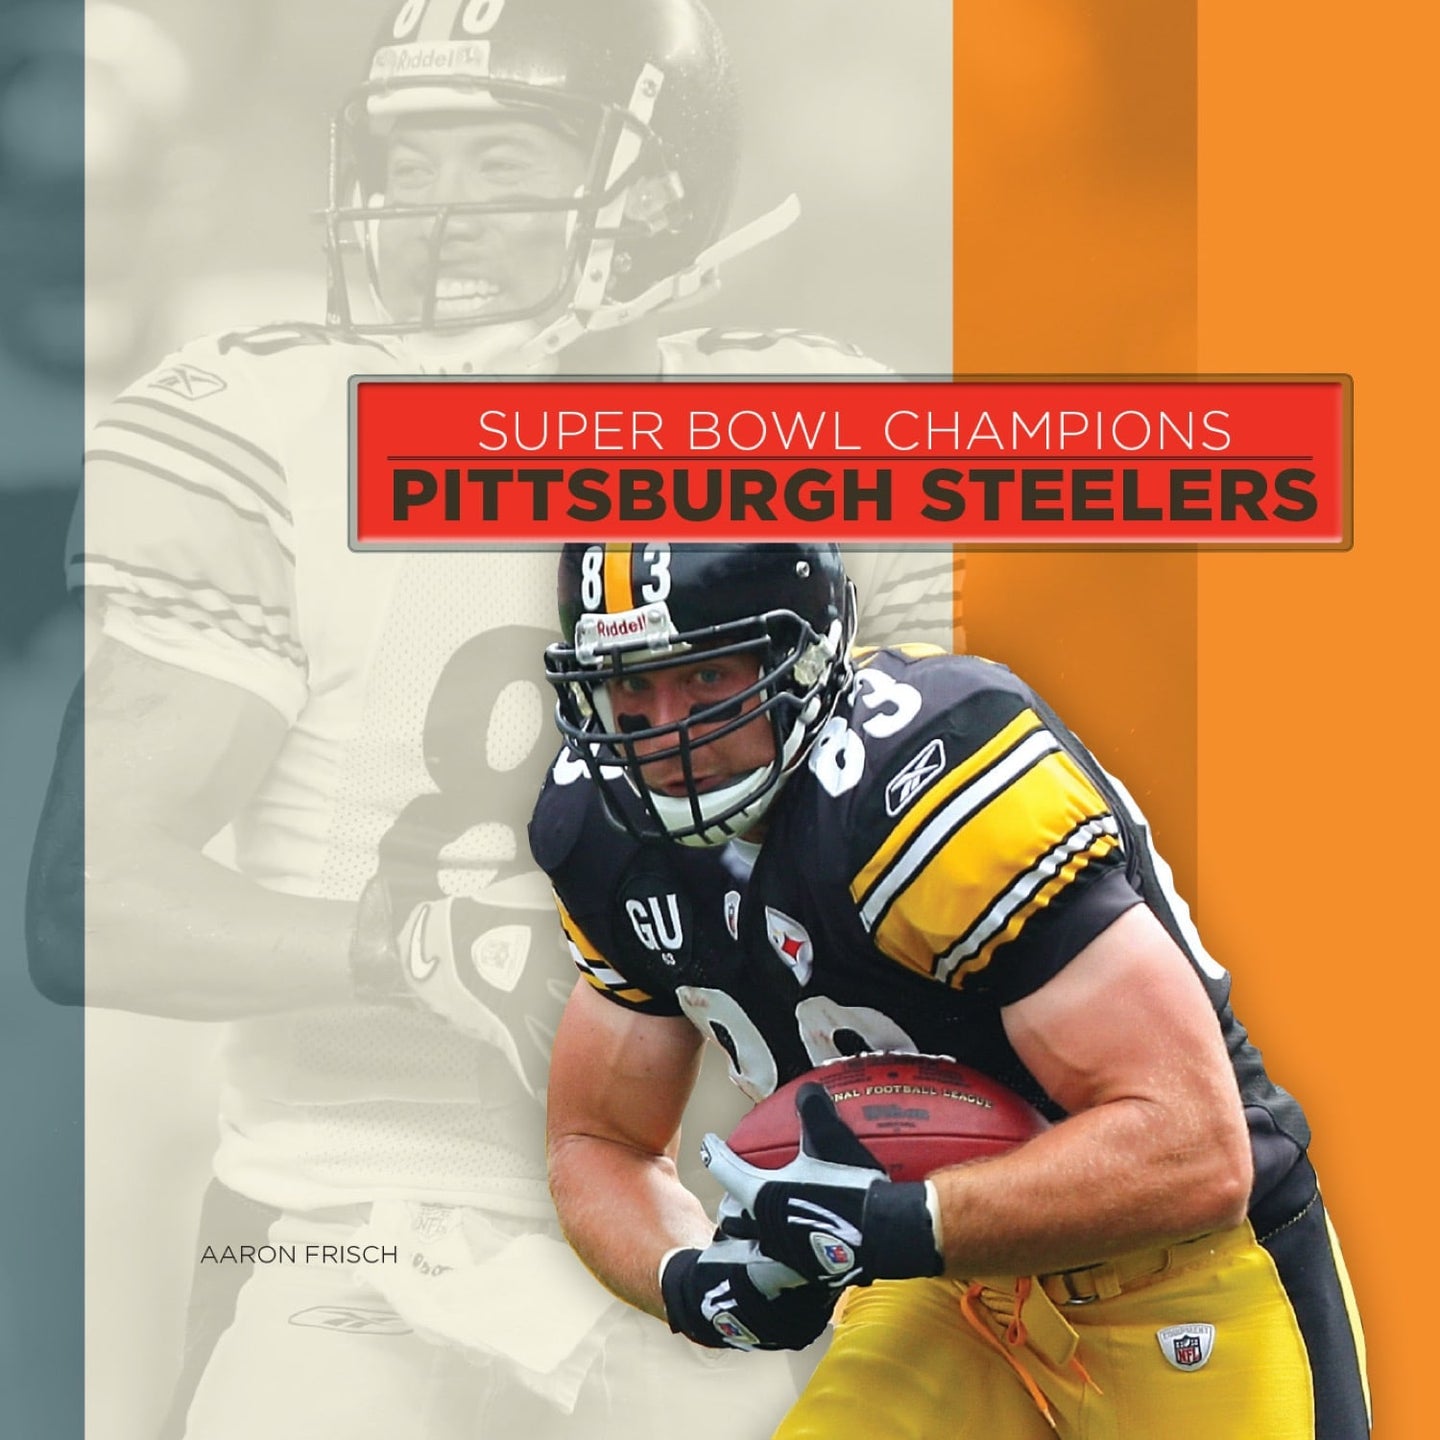 Super Bowl Champions: Pittsburgh Steelers (2014)